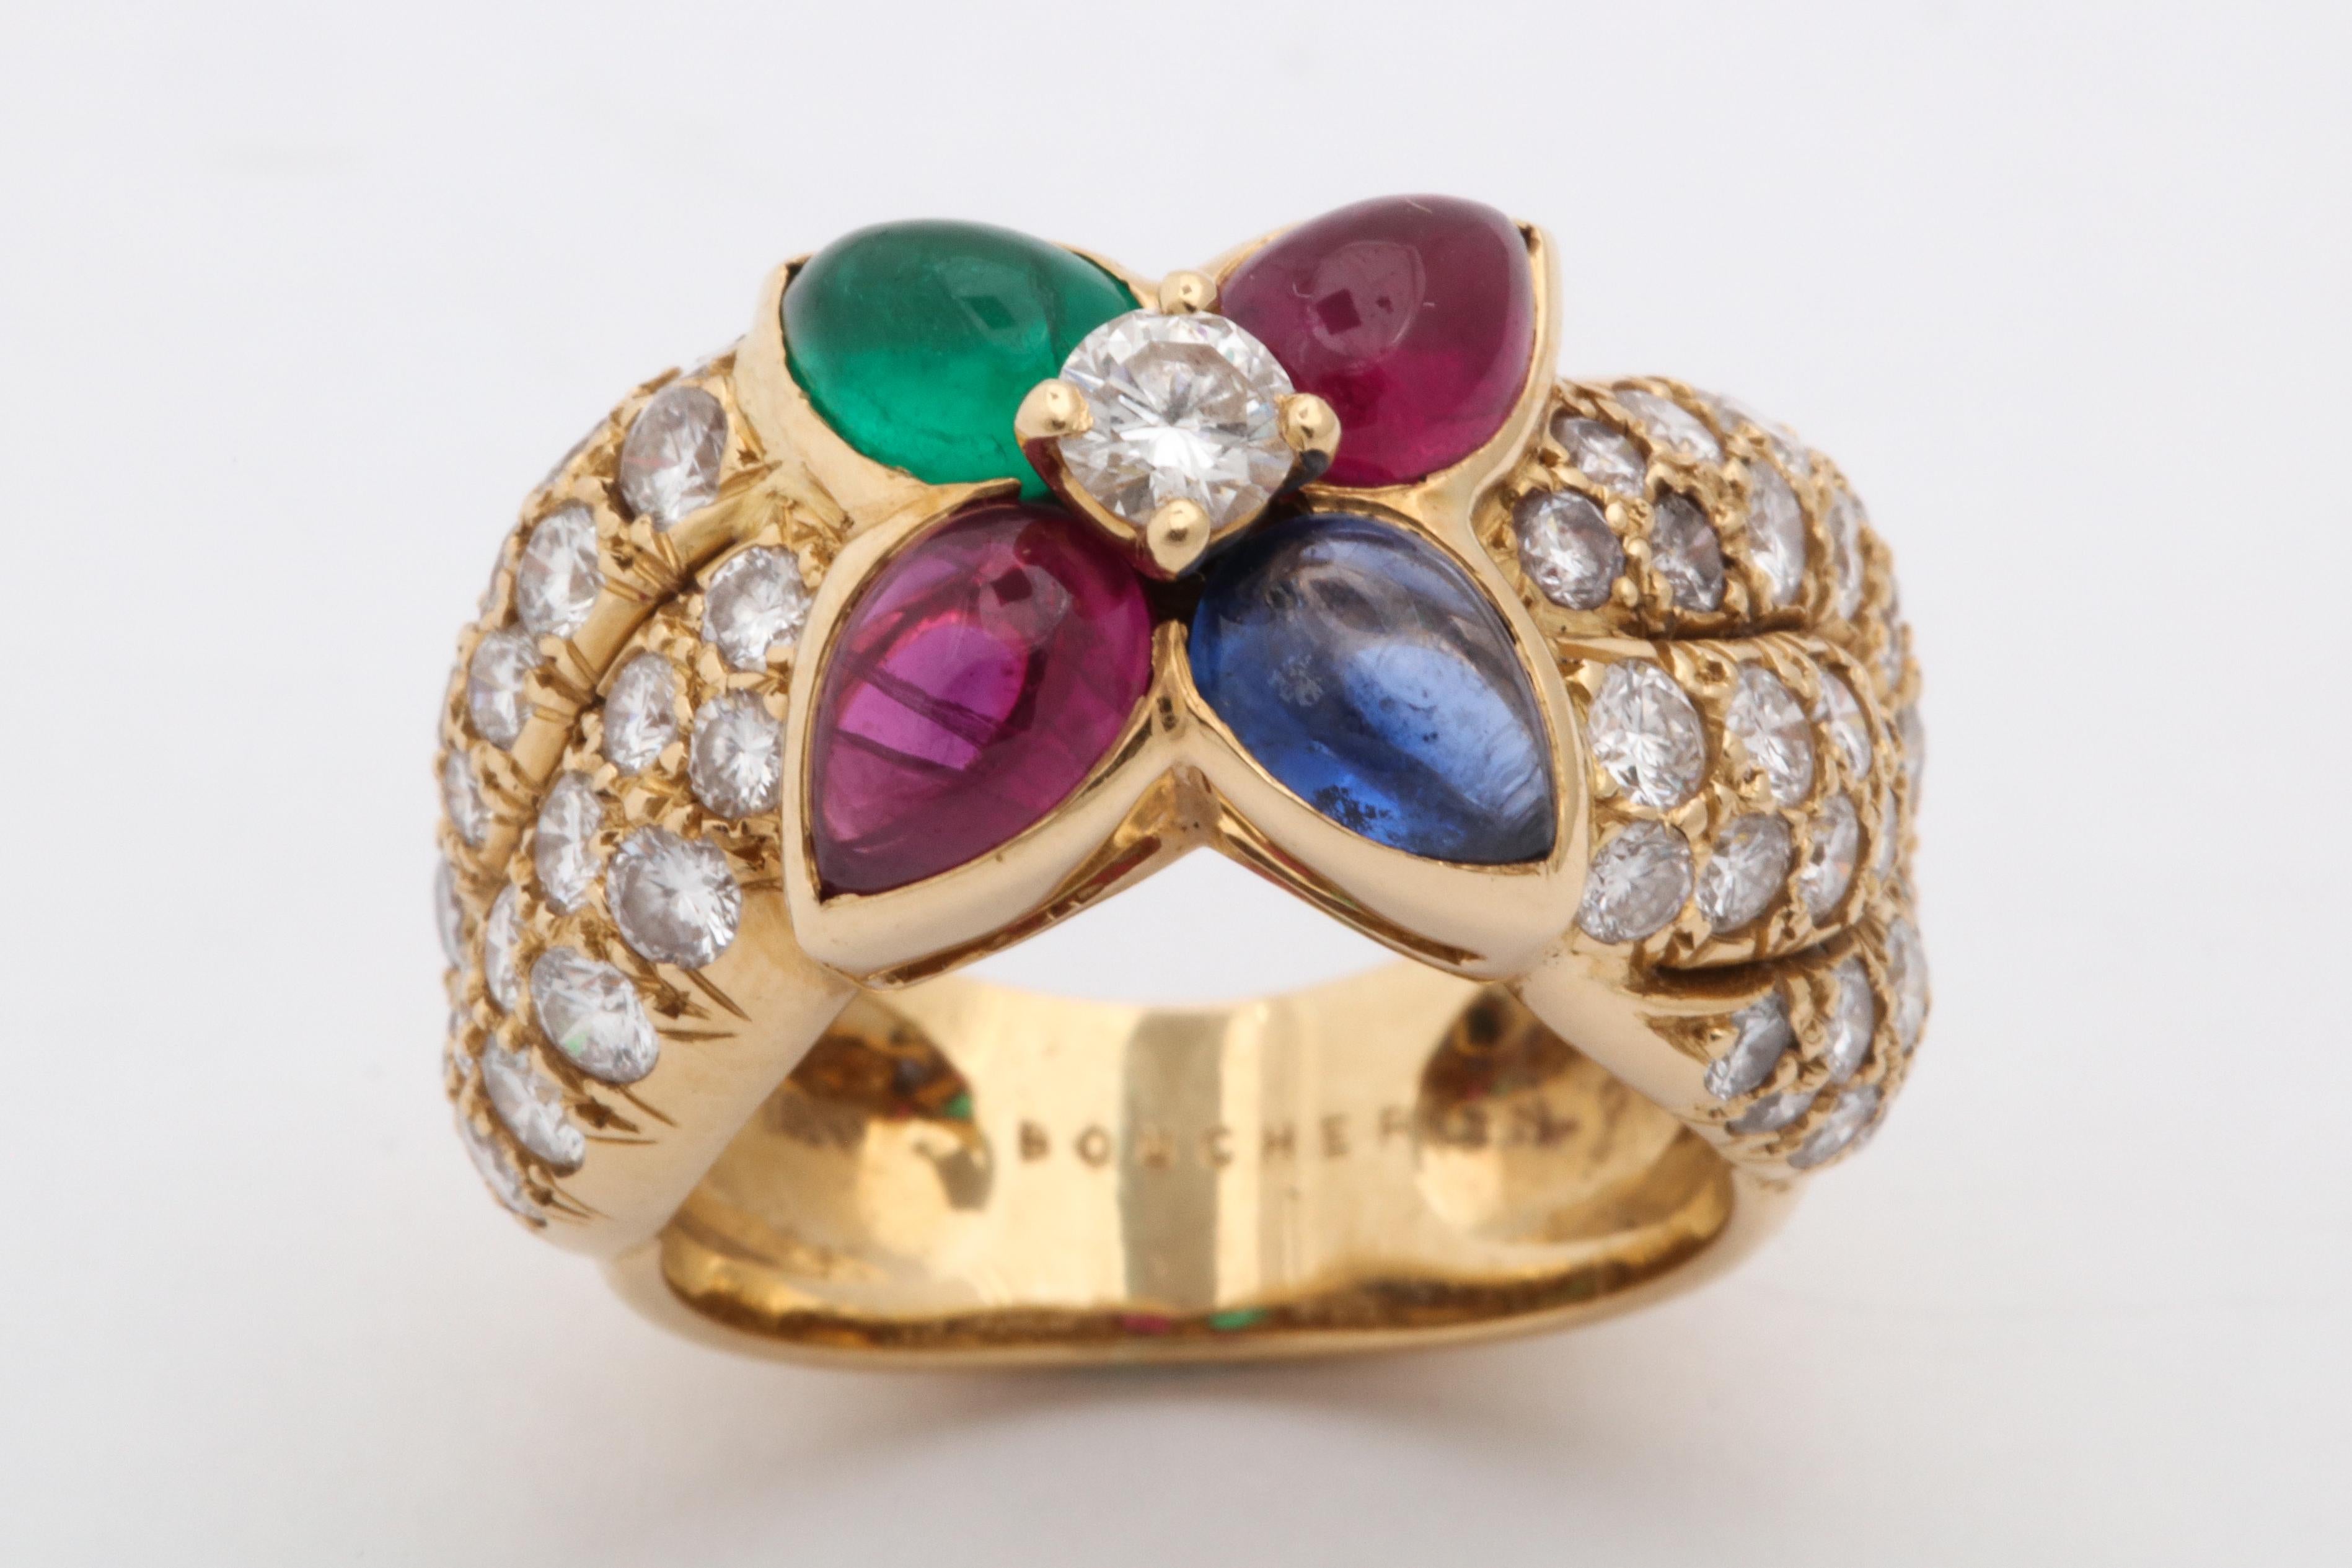 One Ladies 18kt Yellow Gold High Qualty Band Style Ring Composed Of Three Different Colored Stones,One Emerald,Two Rubies And One Sapphire All Pear Shaped Cabochon Cut. This Ring Is Further Embellished With Numerous Diamonds Weighing Approximately